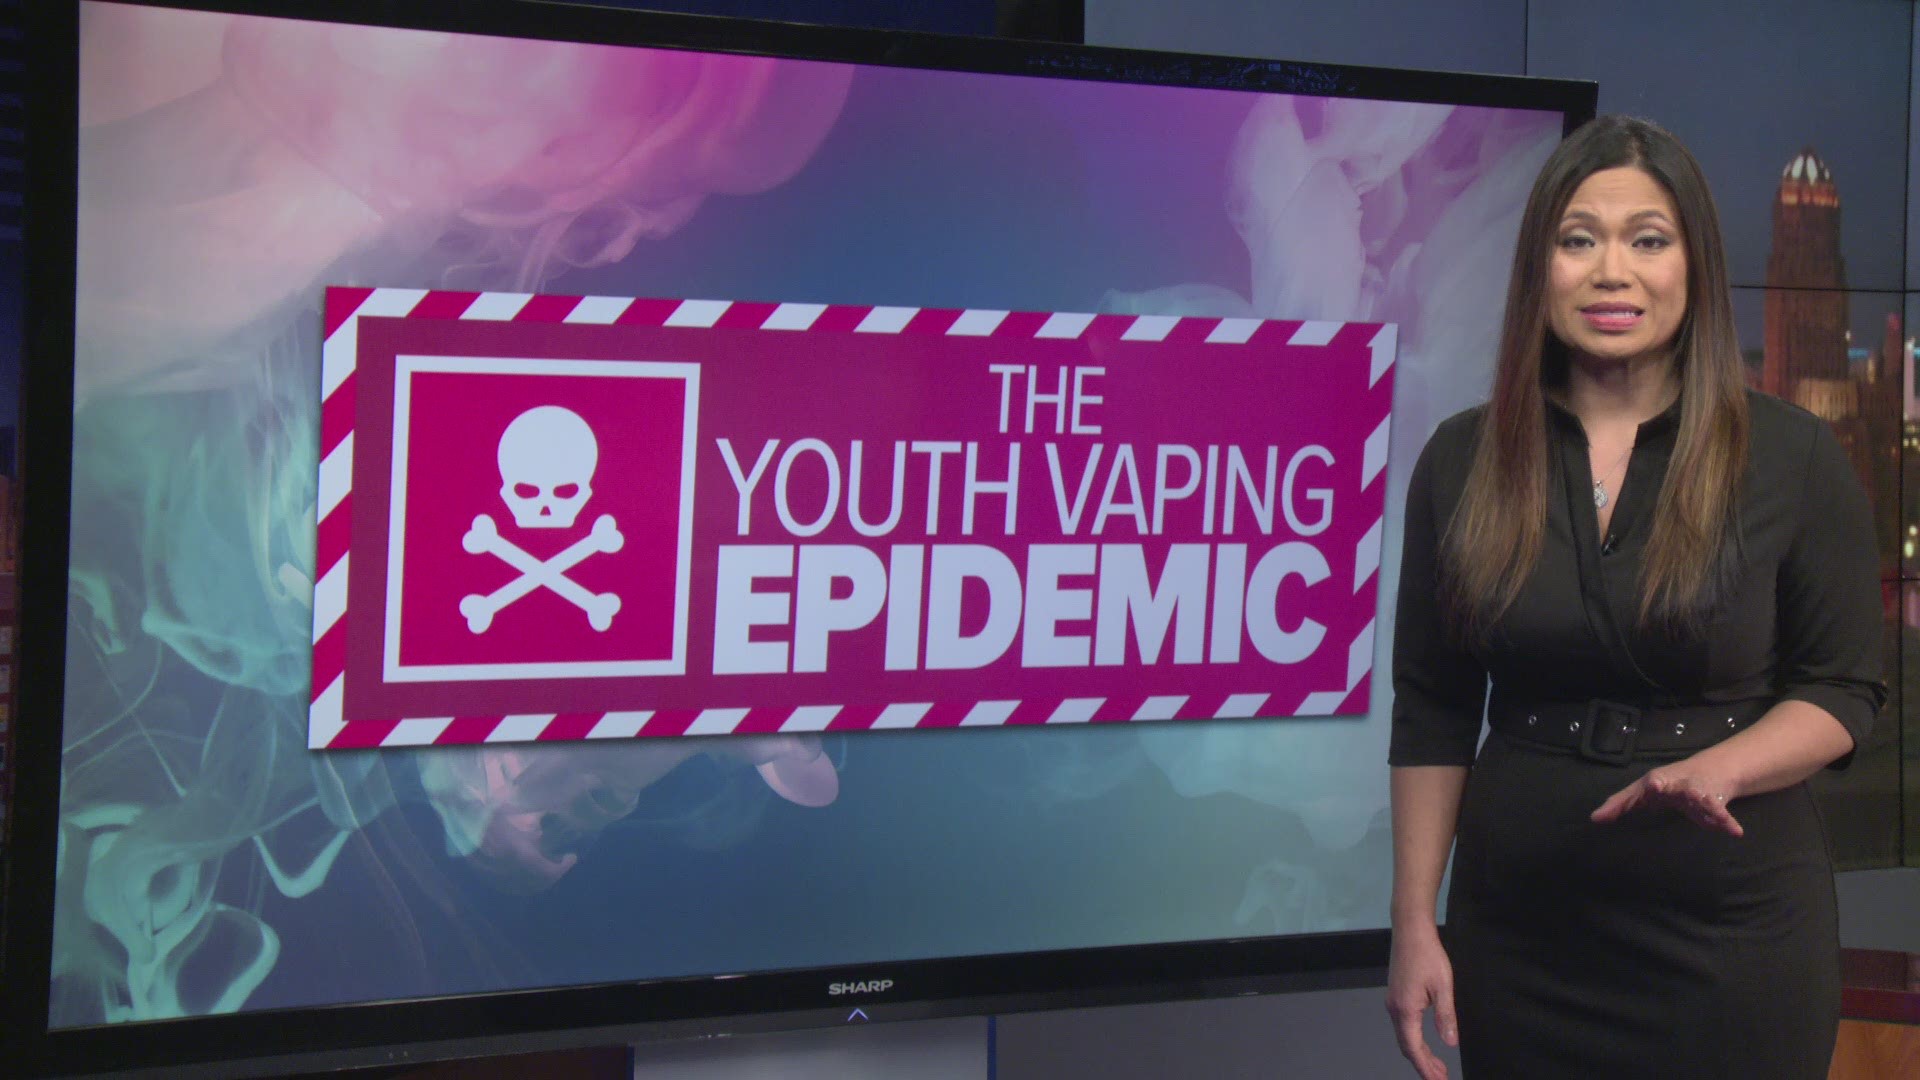 Because of strategic marketing, and a misconception that e-cigarettes are a "safe" alternative to smoking, an alarming number of young people are now addicted to nicotine.
This third and final report in a series, delves into what is being done to fix this escalating problem.